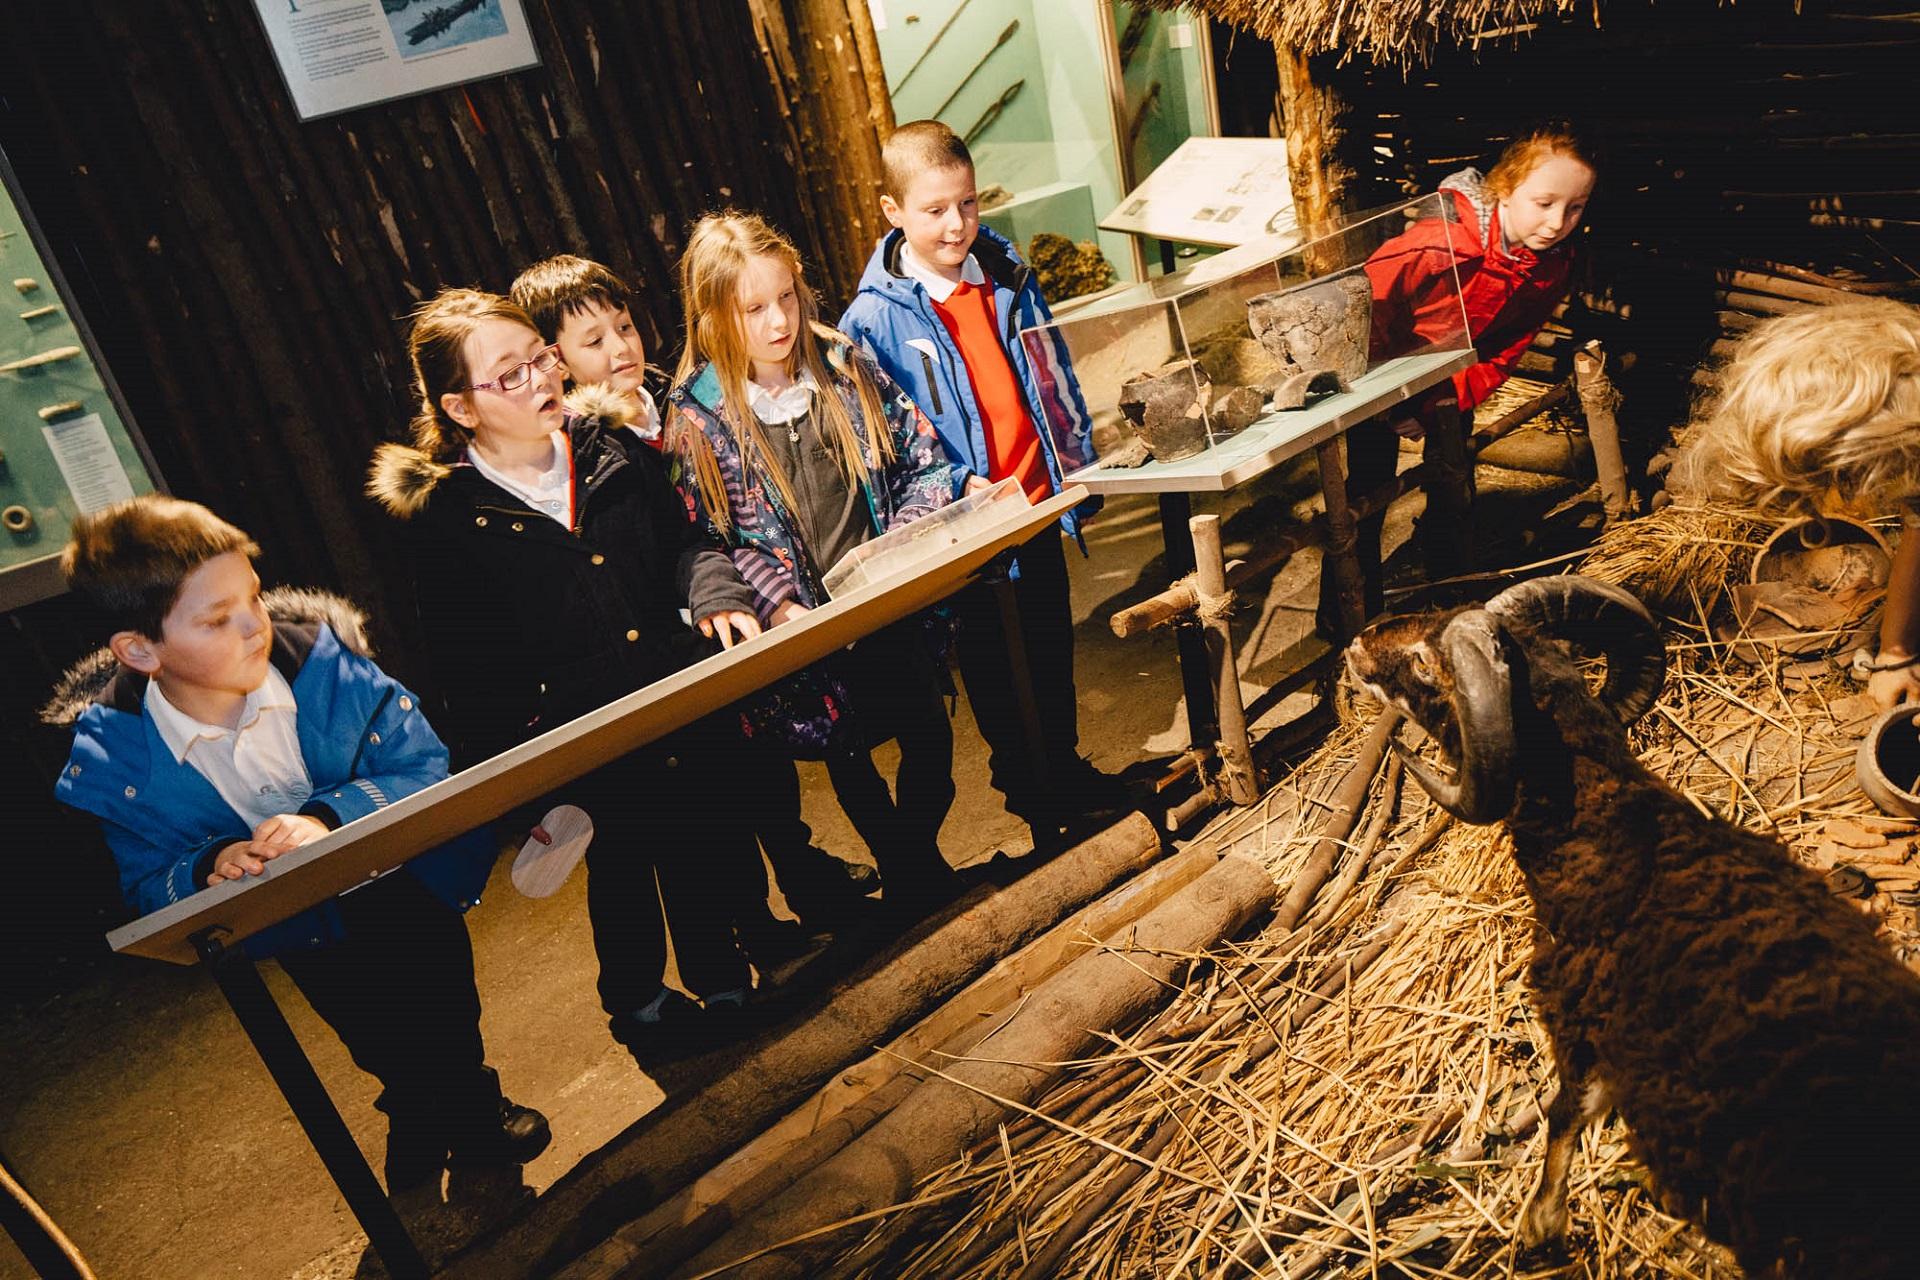 A group of school children looking at a Celtic village display in a museum.